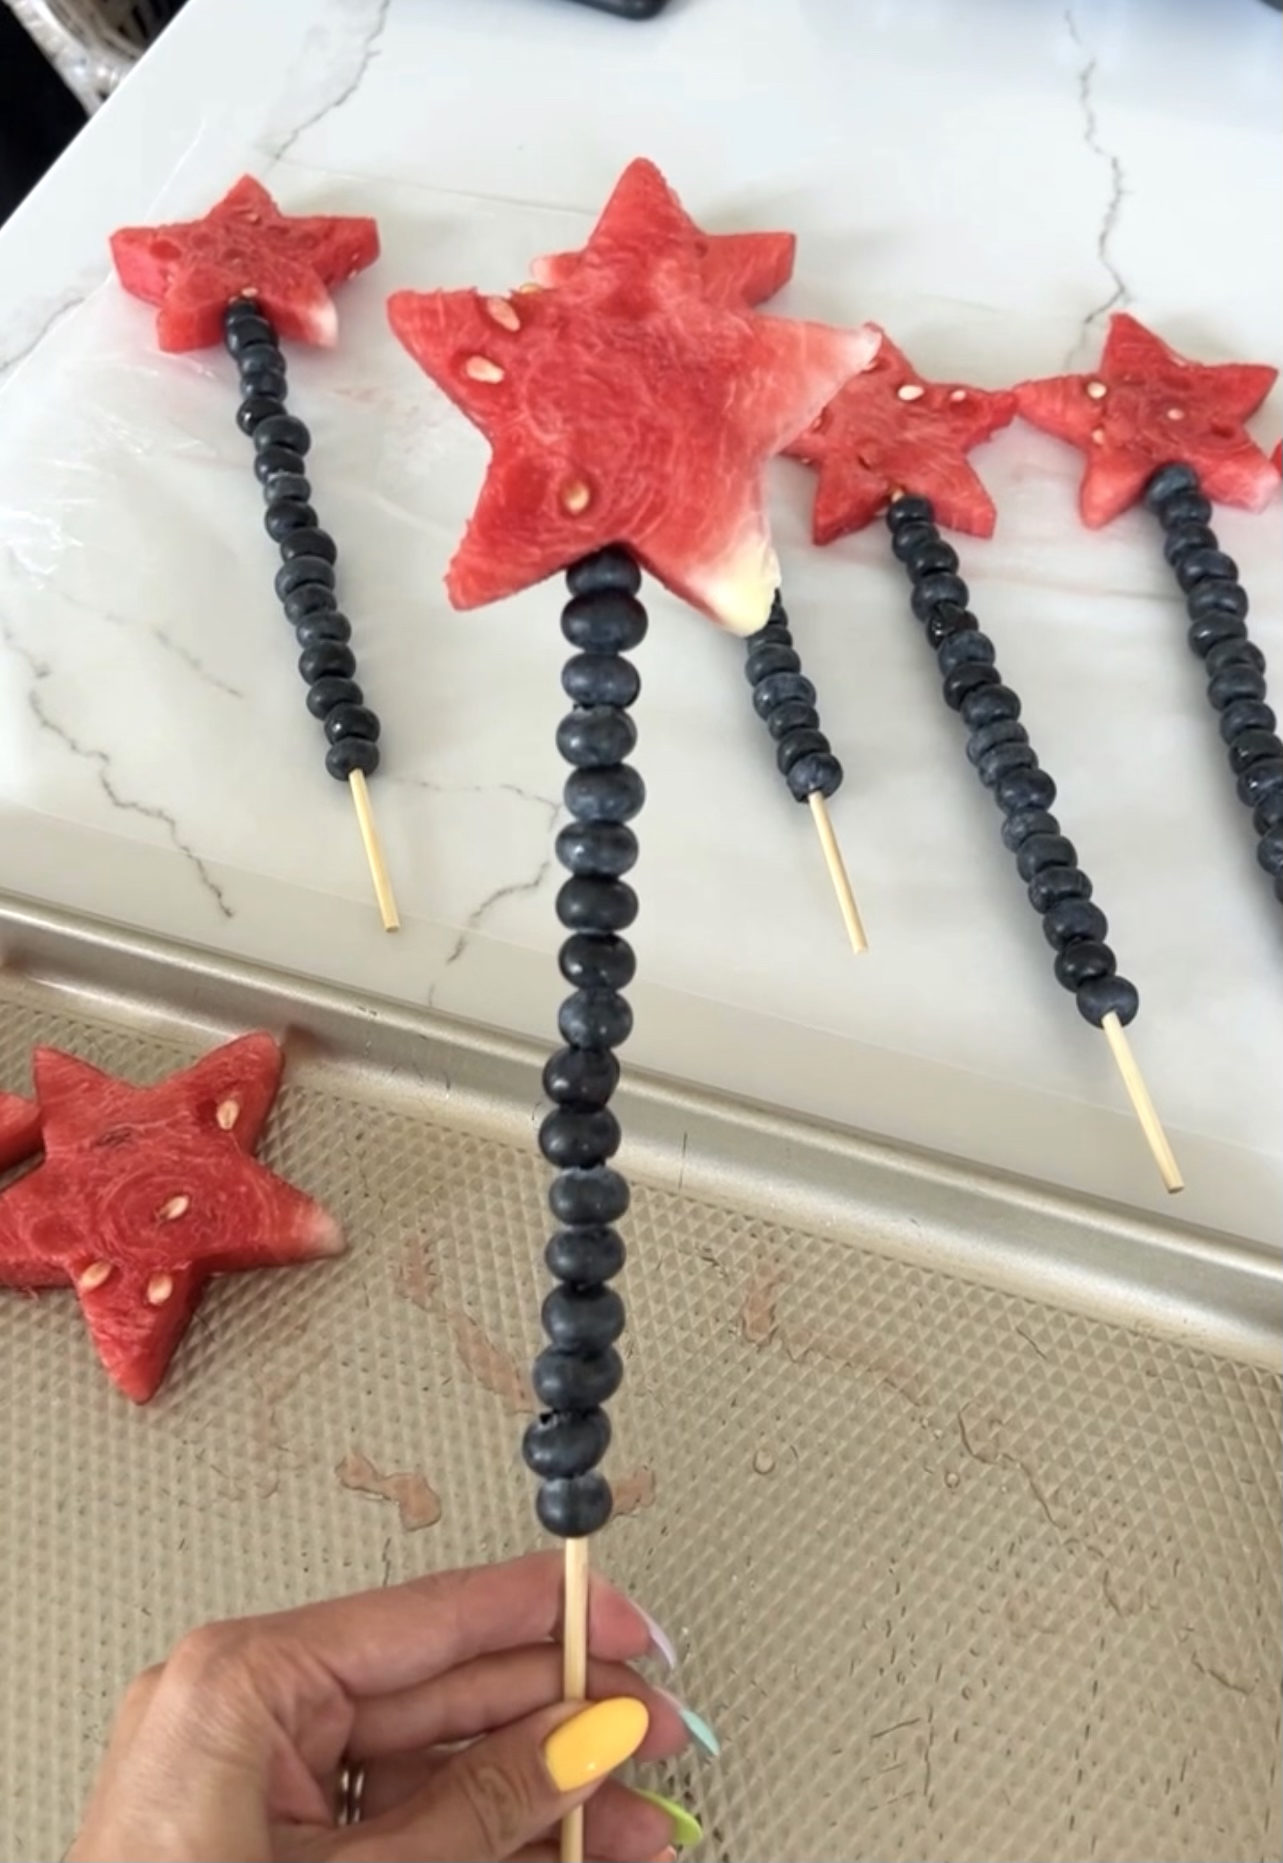 Fourth of July, 5 party hacks, 4th of July party, festive fruit, verisimilitude coordinated fruit, charcuterie spread, party spread, charcuterie board, Sams club, 4th of July, 4th of July charcuterie board, fruit sparklers, watermelon stars, blueberries